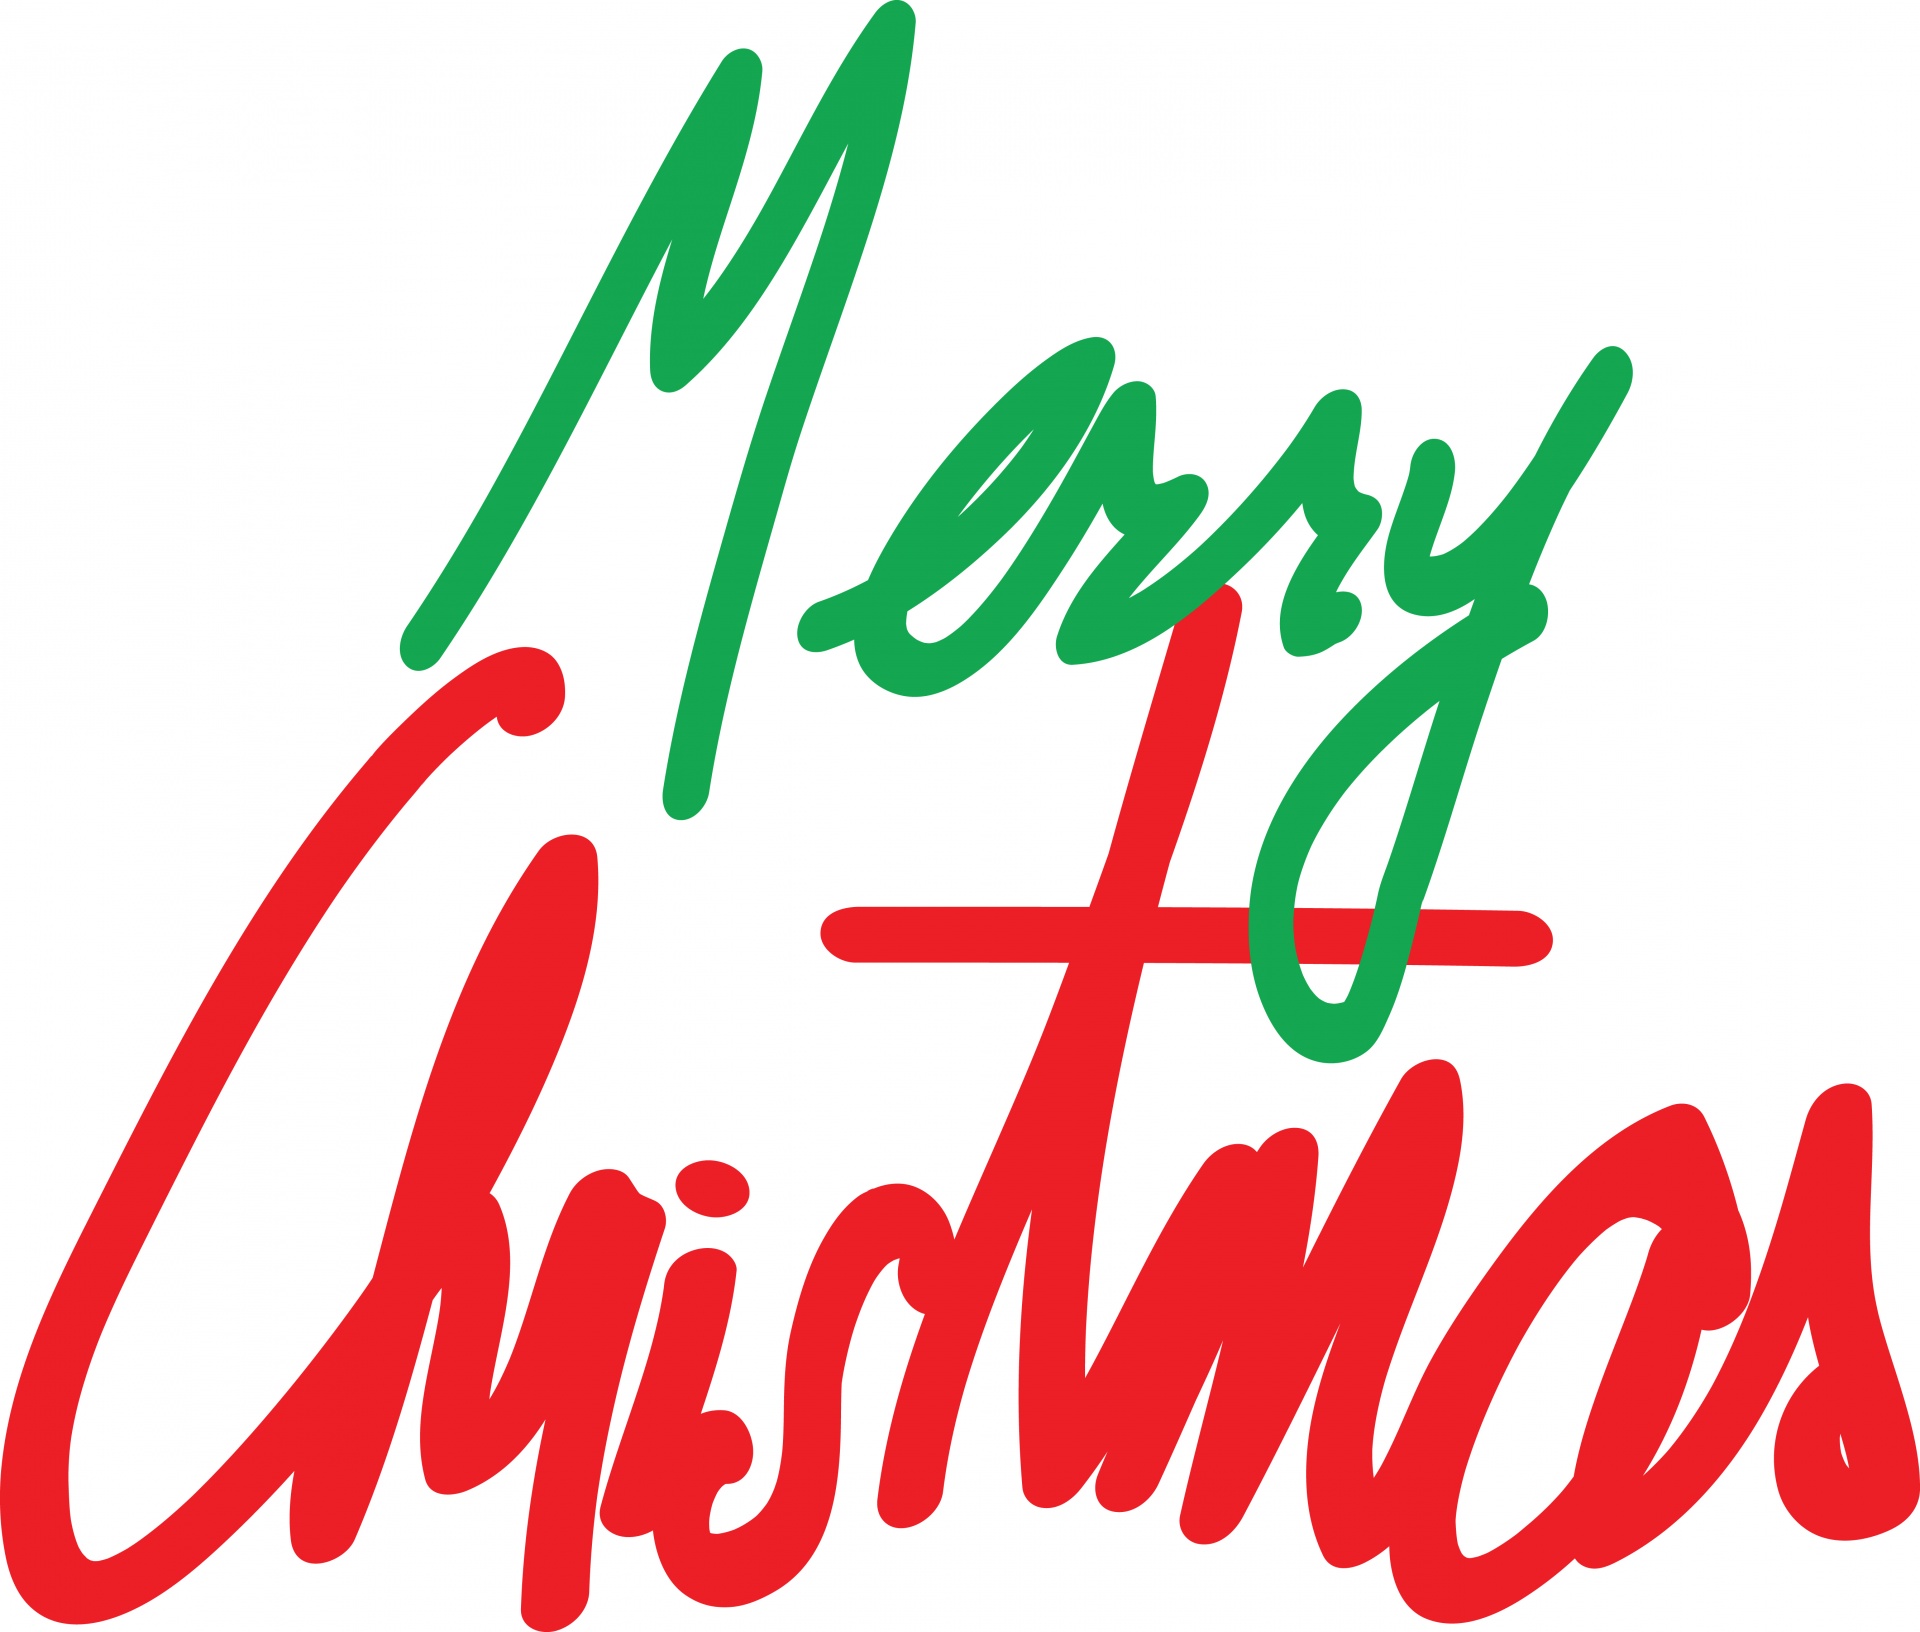 merry christmas words message free photo